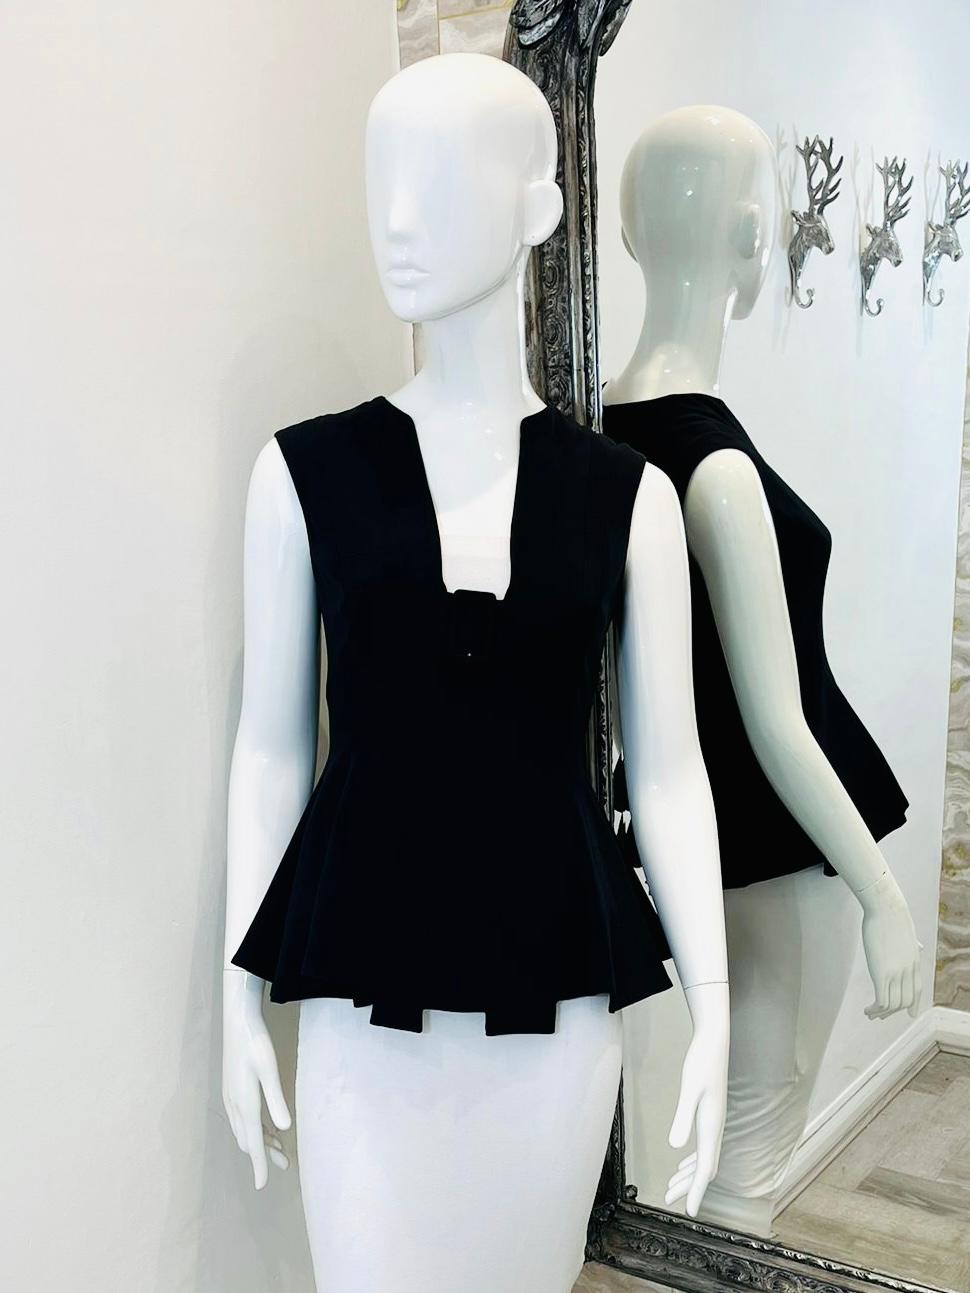 Alexander McQueen Square Neckline Peplum Top

Black sleeveless top with oversized buckle to the square neckline 

and pleated detailing to the peplum.

Size - 40IT

Condition - Good/Very Good ( Black color coming off on the zipper pull